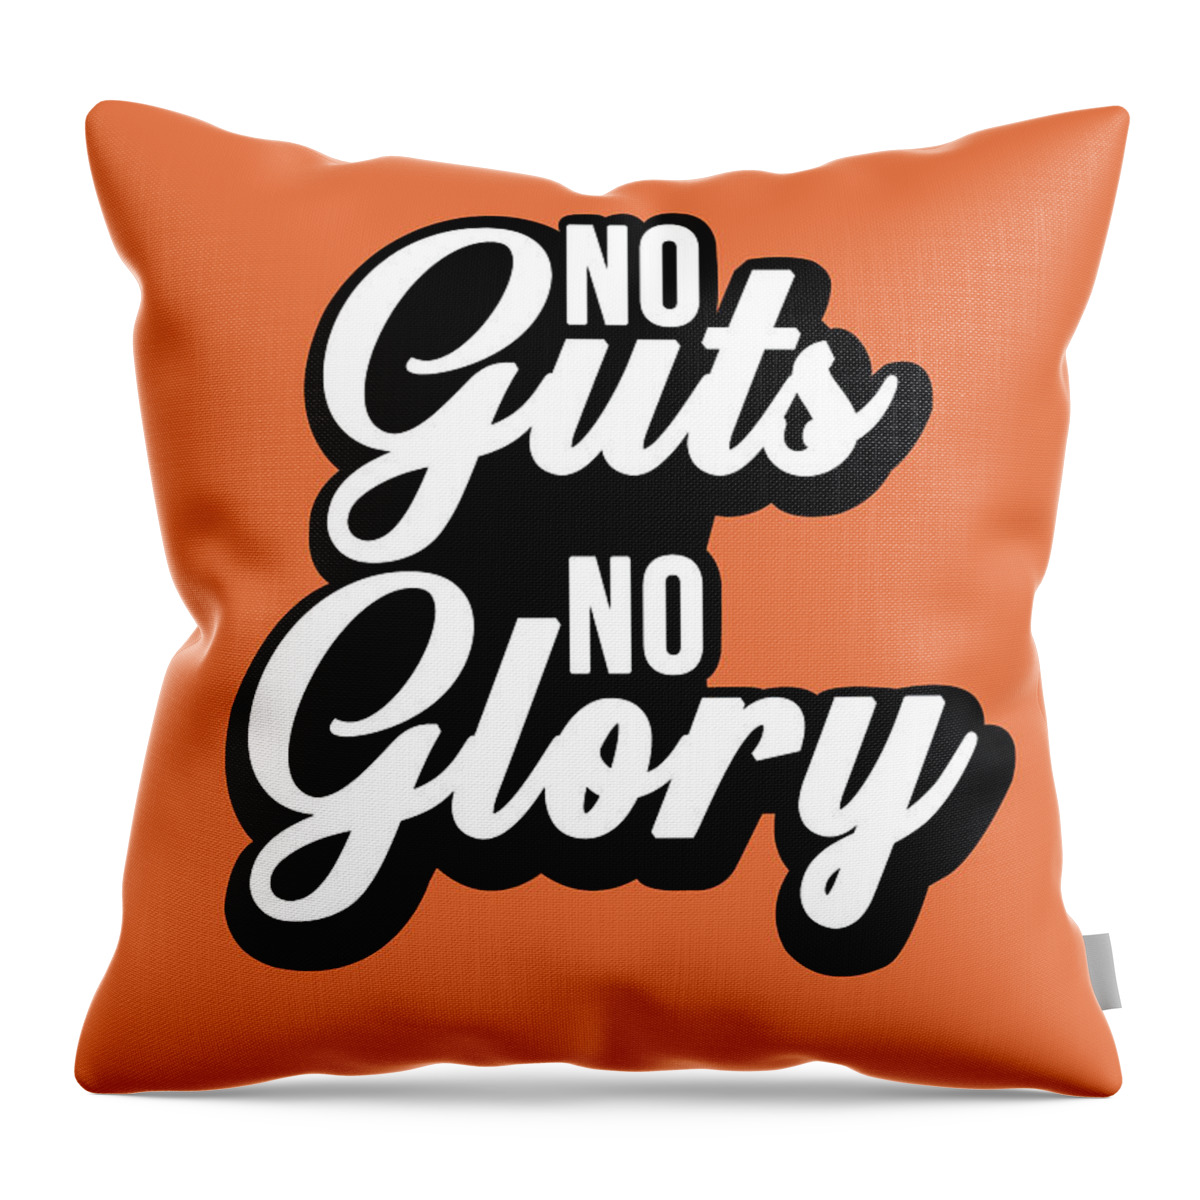 No Guts No Glory Throw Pillow featuring the mixed media No Guts No Glory - Motivational Quote - Typography Print - Quote Poster - Orange, Black by Studio Grafiikka